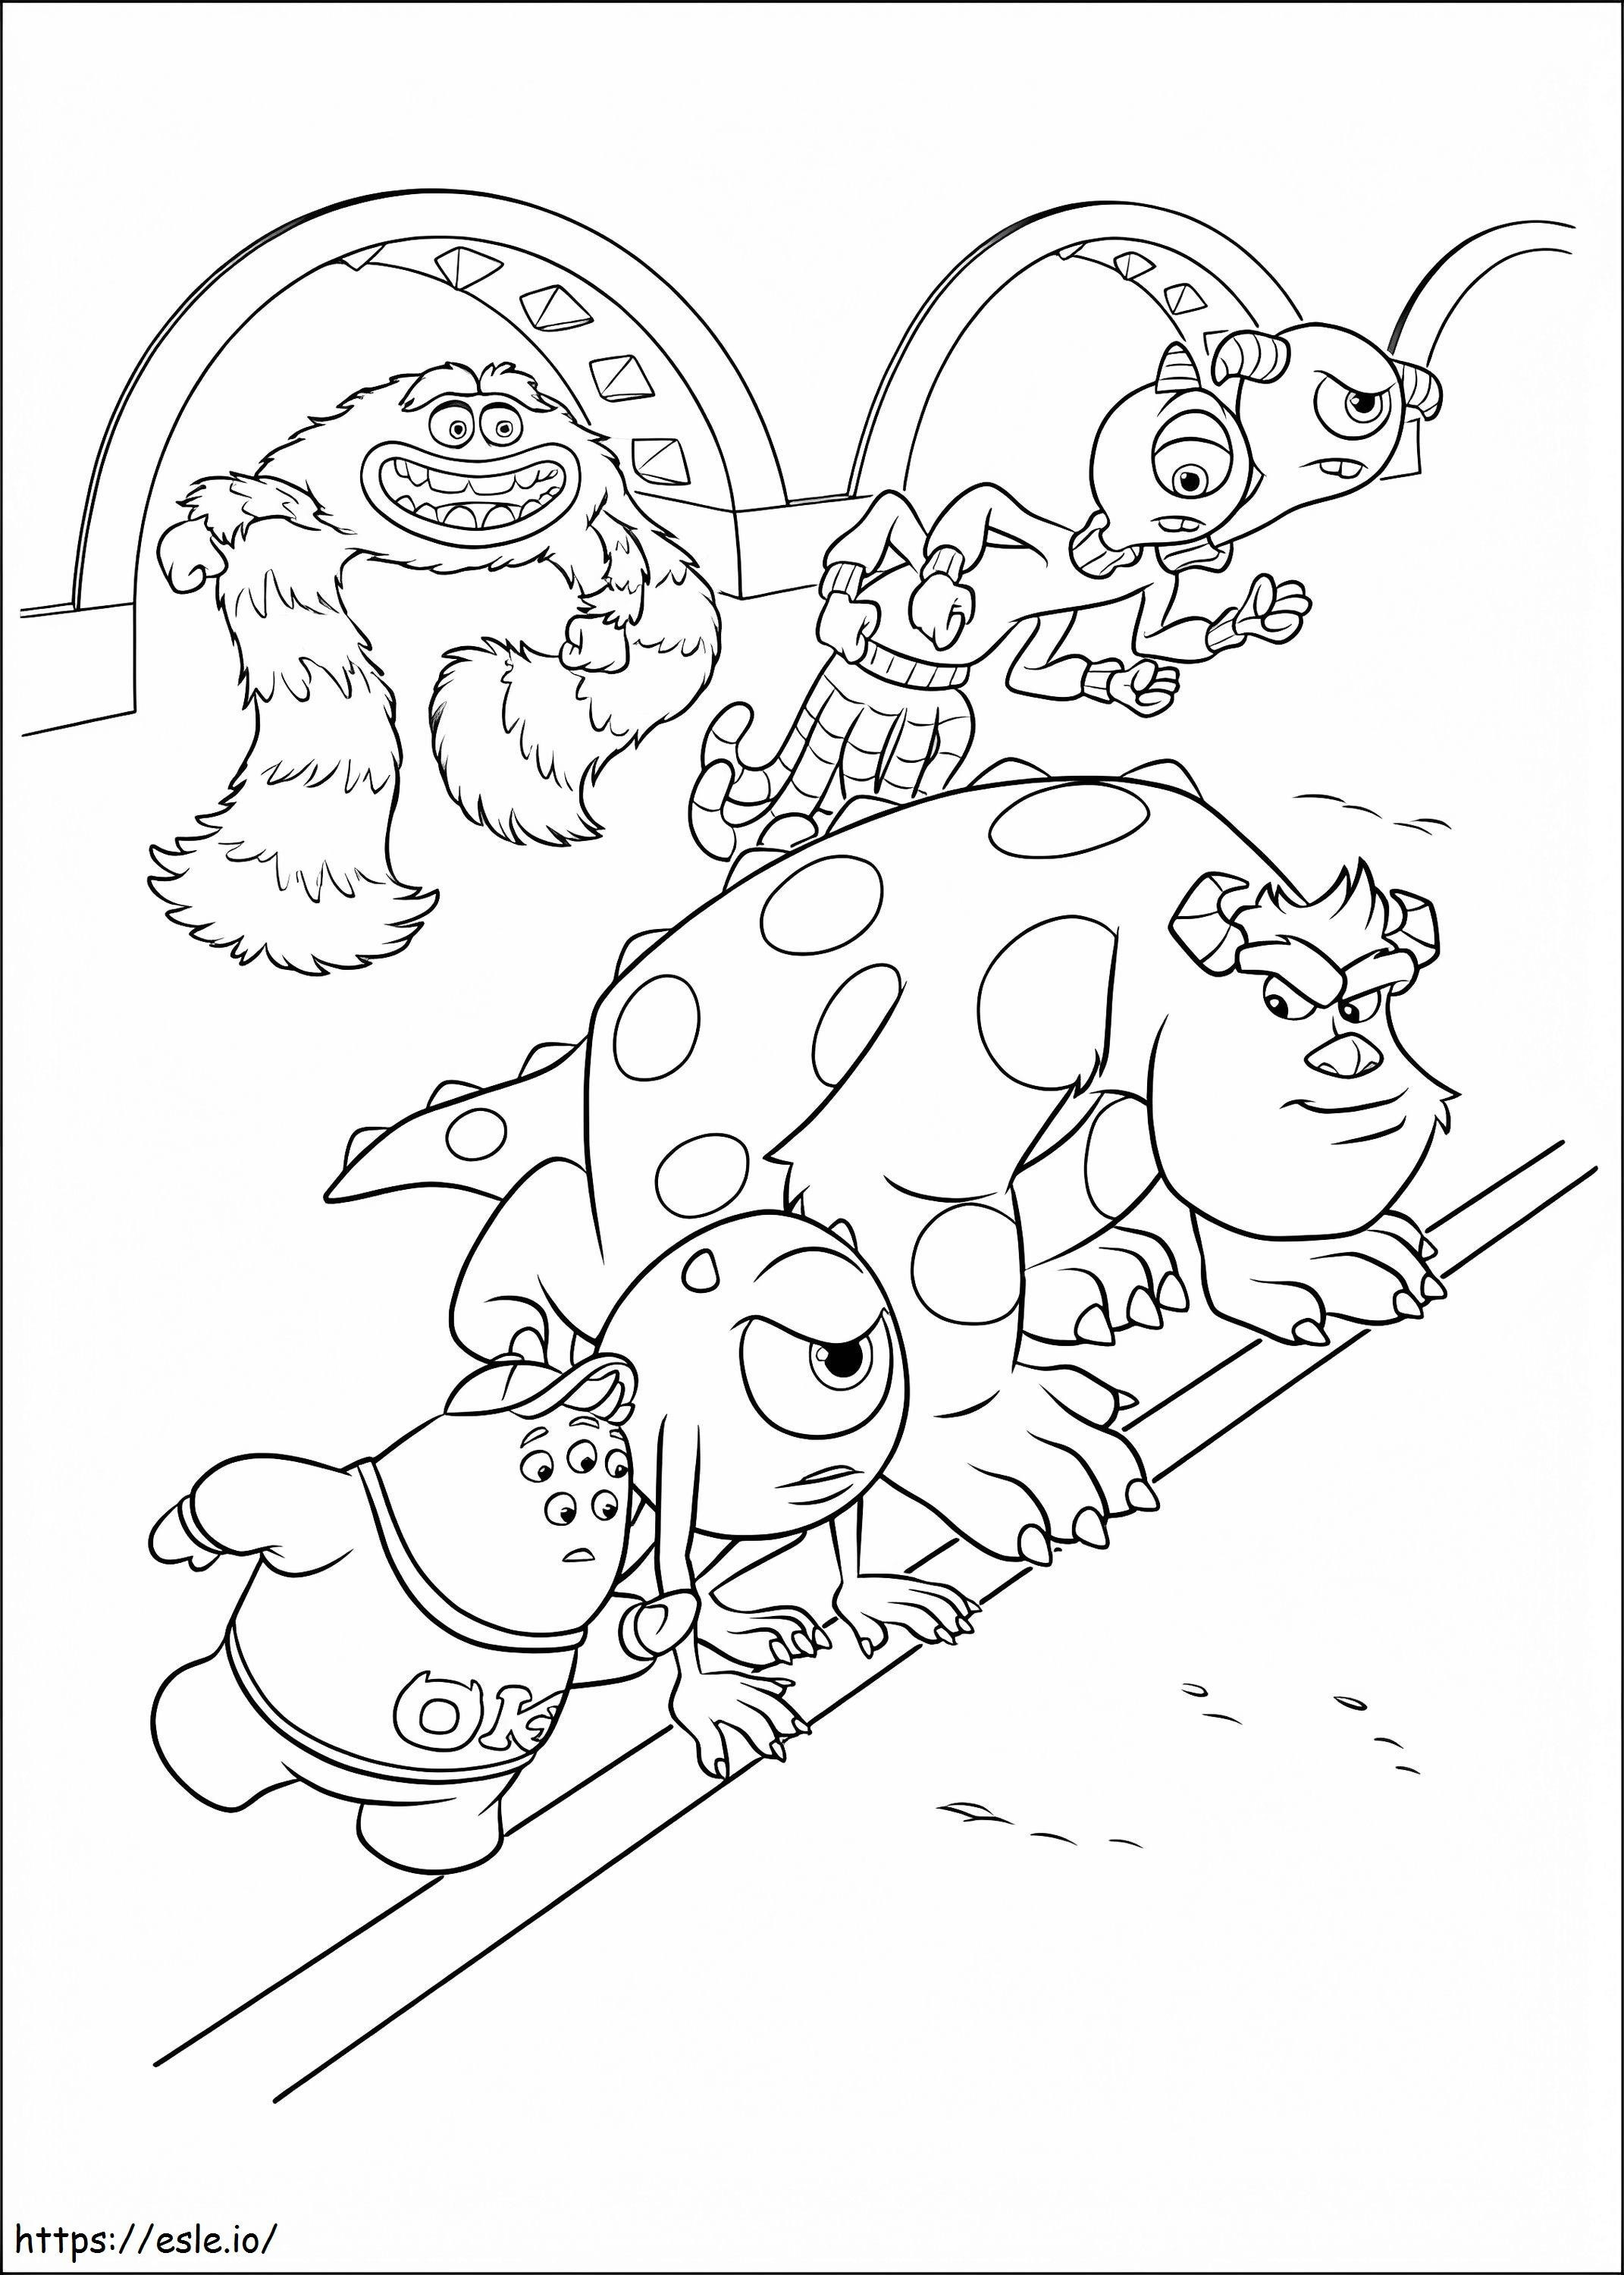 Monsters University 11 coloring page